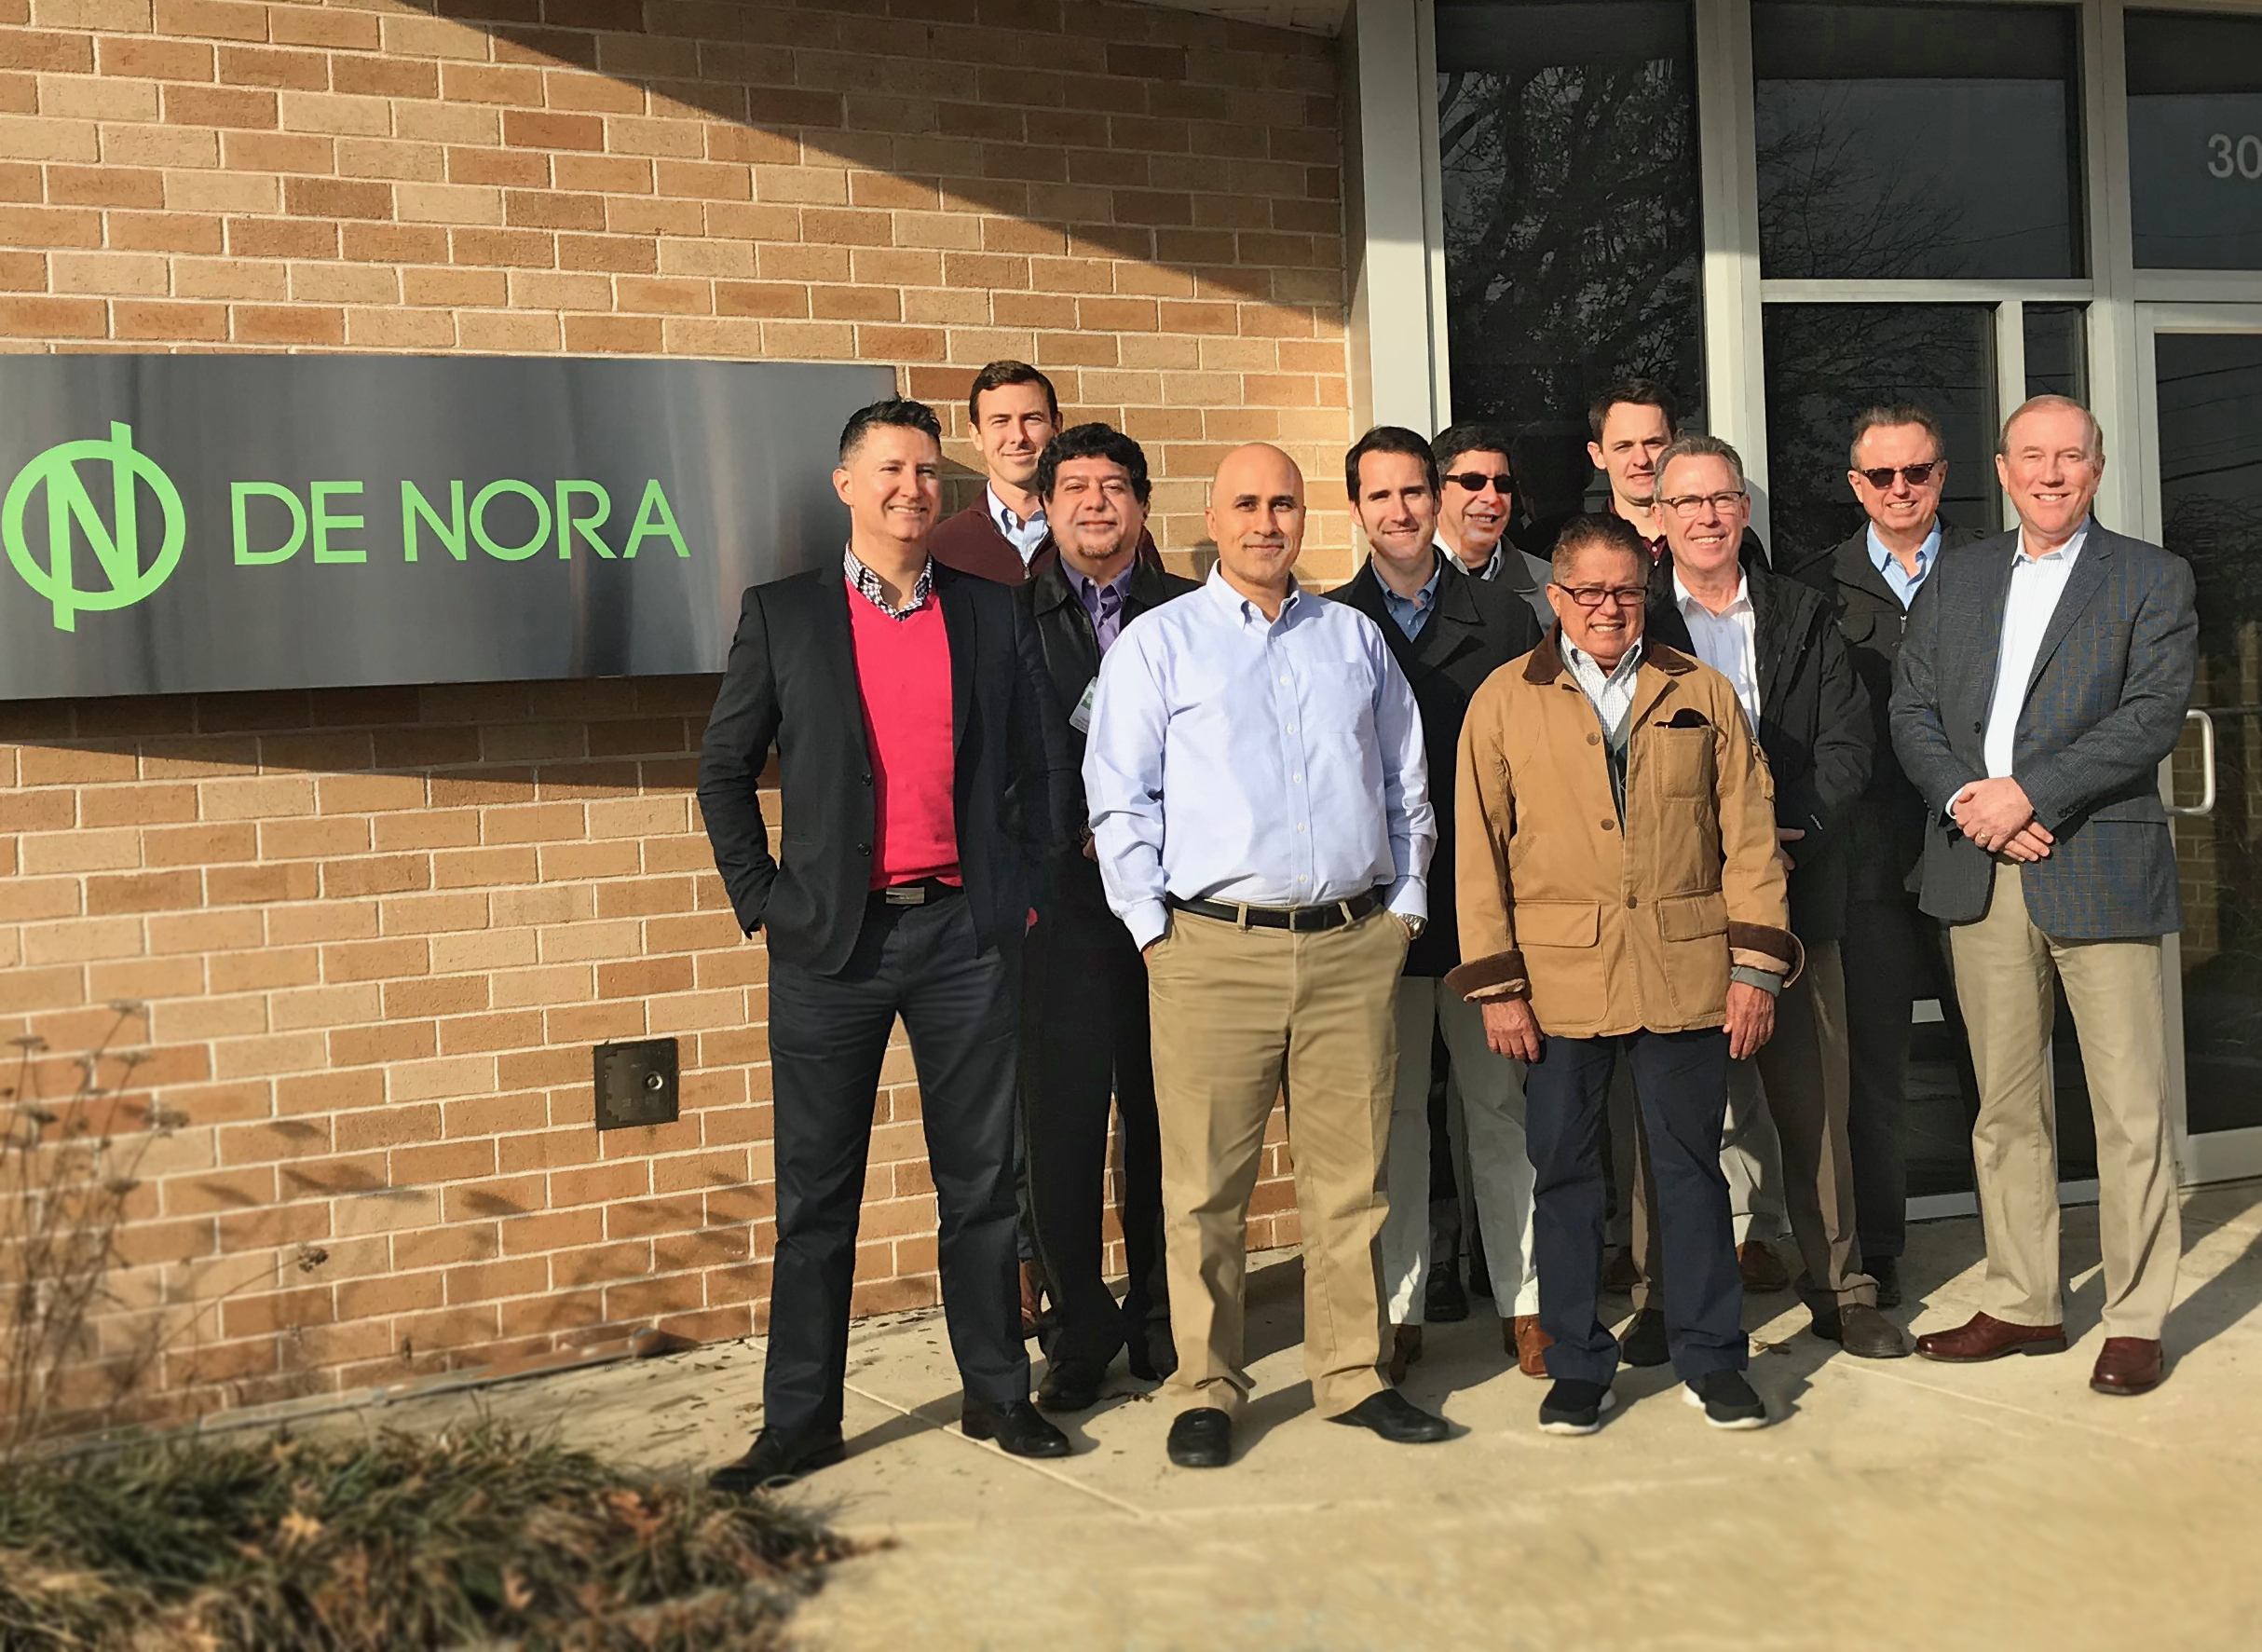 The De Nora Water Technologies sales team for the Americas market.